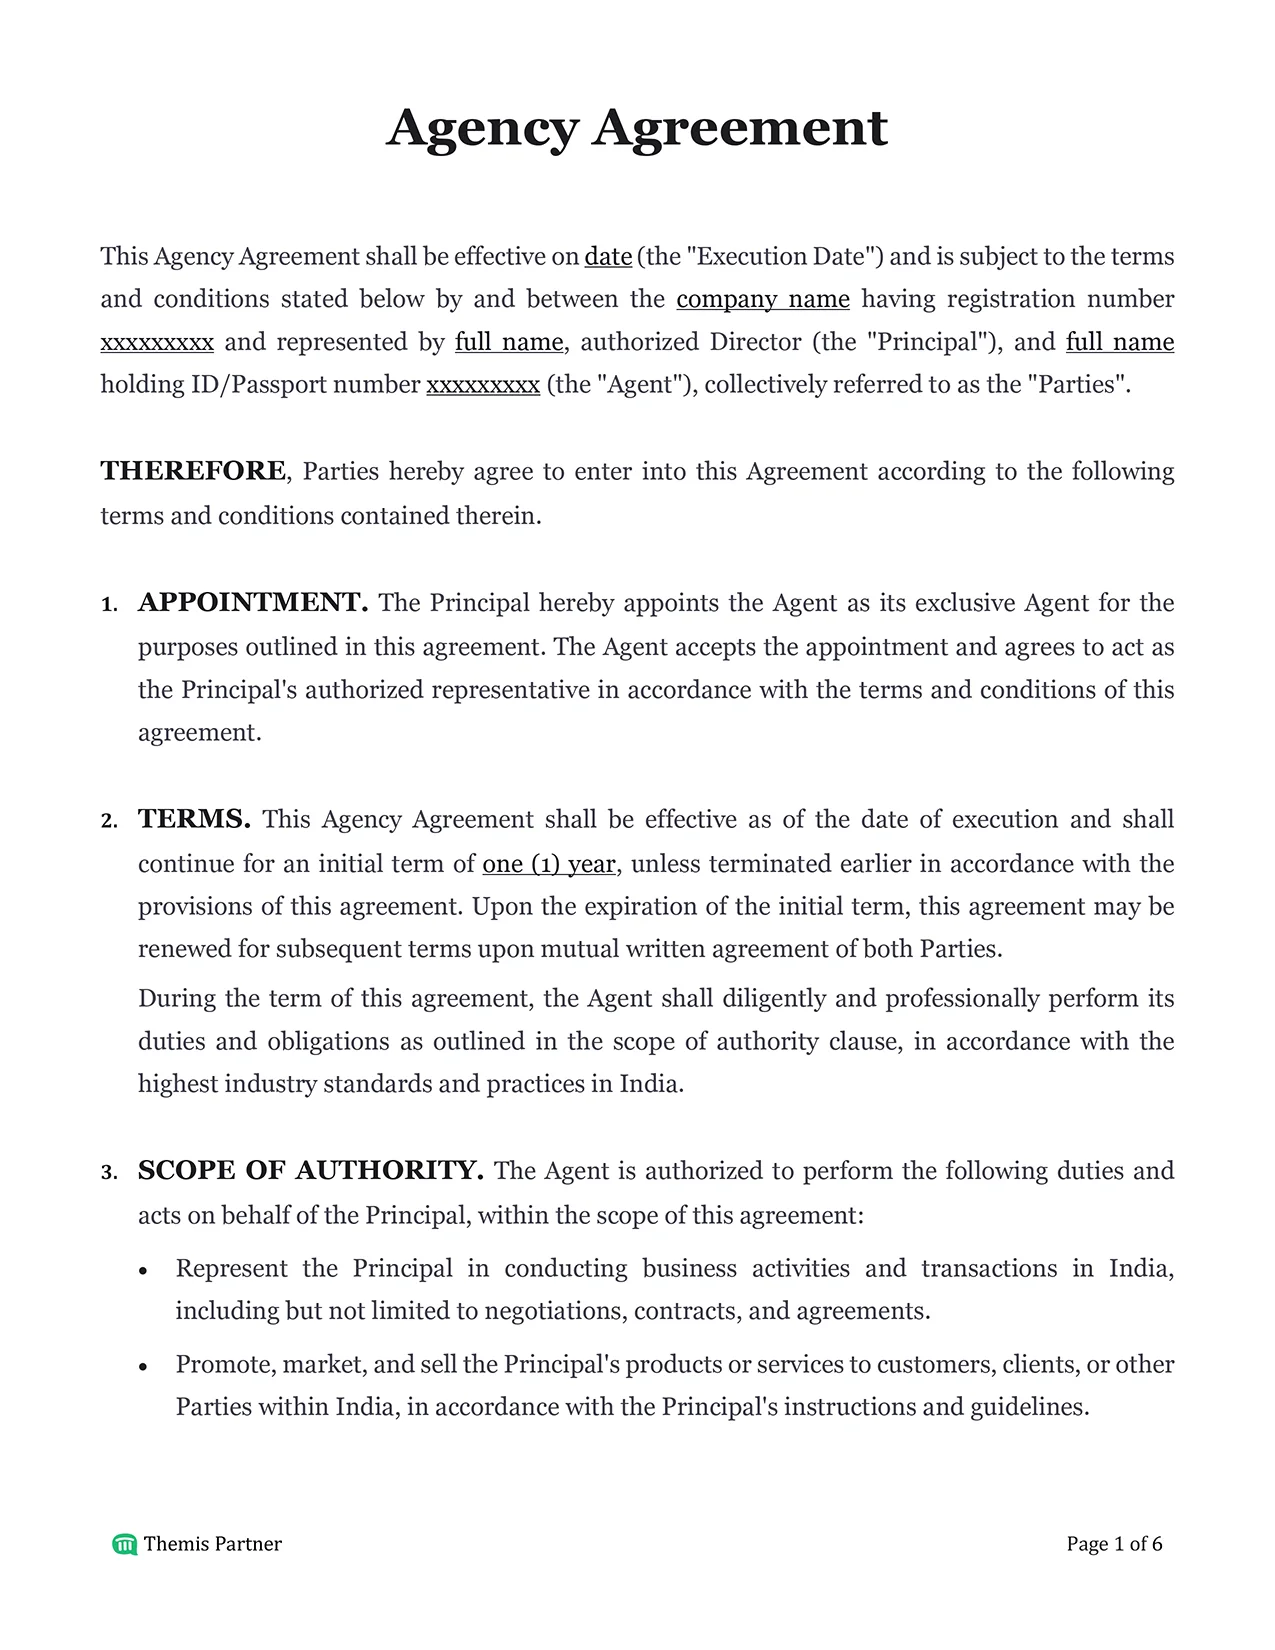 Agency agreement India 1